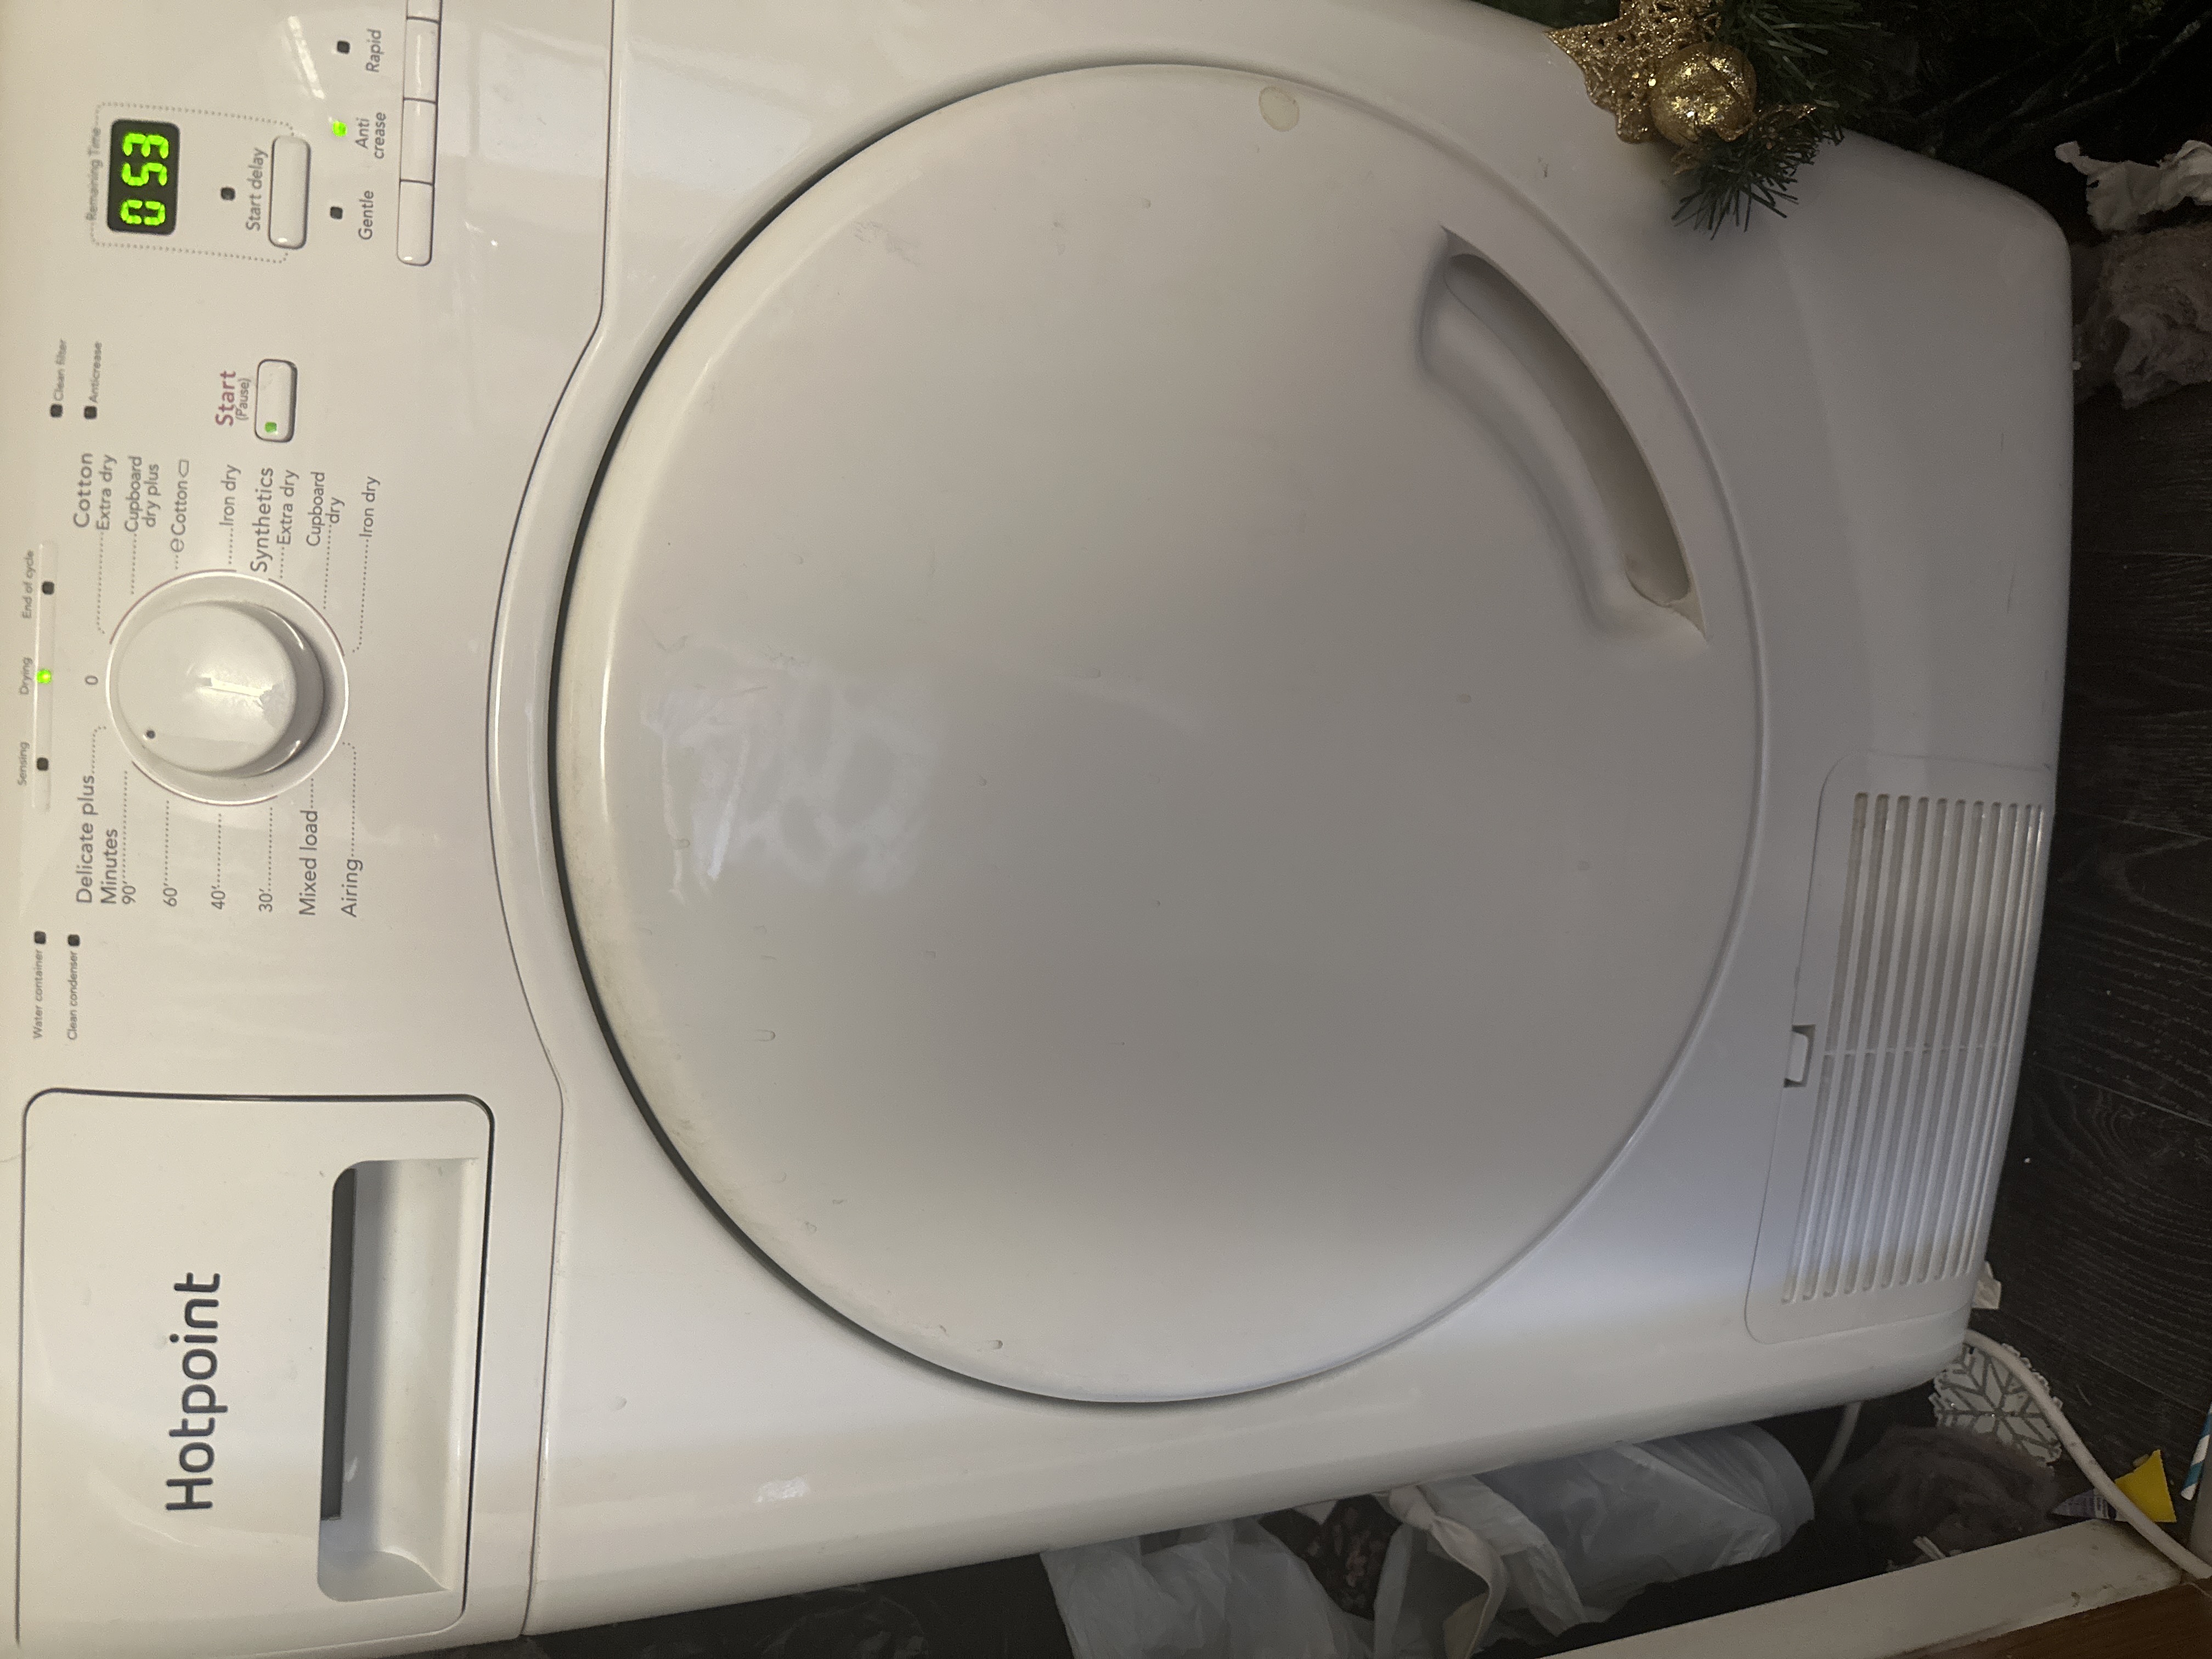 Do you know which cycle is the Hottest on this Dryer? I &like to dry my bedding on a Hot cycle. ...